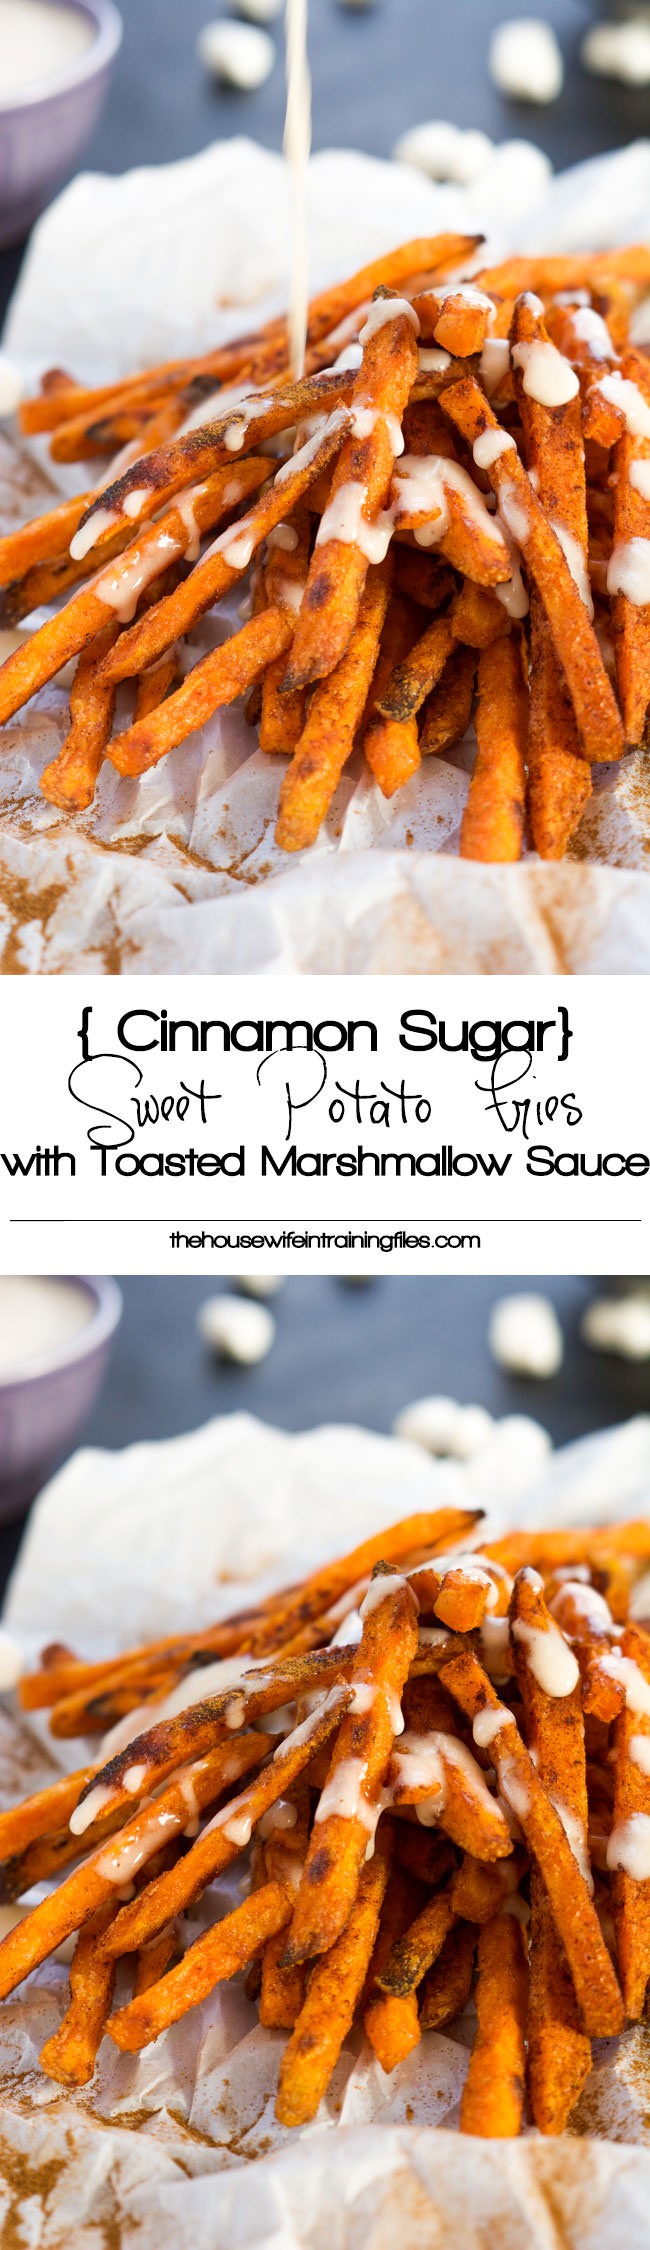 Cinnamon Sugar Sweet Potato Fries are cinnamon and sugar dusted and served with a homemade toasted marshmallow sauce! They are not your typical side of fries, rather a upgraded dessert! #dessert #sweetpotatofries #marshmallows #gameday